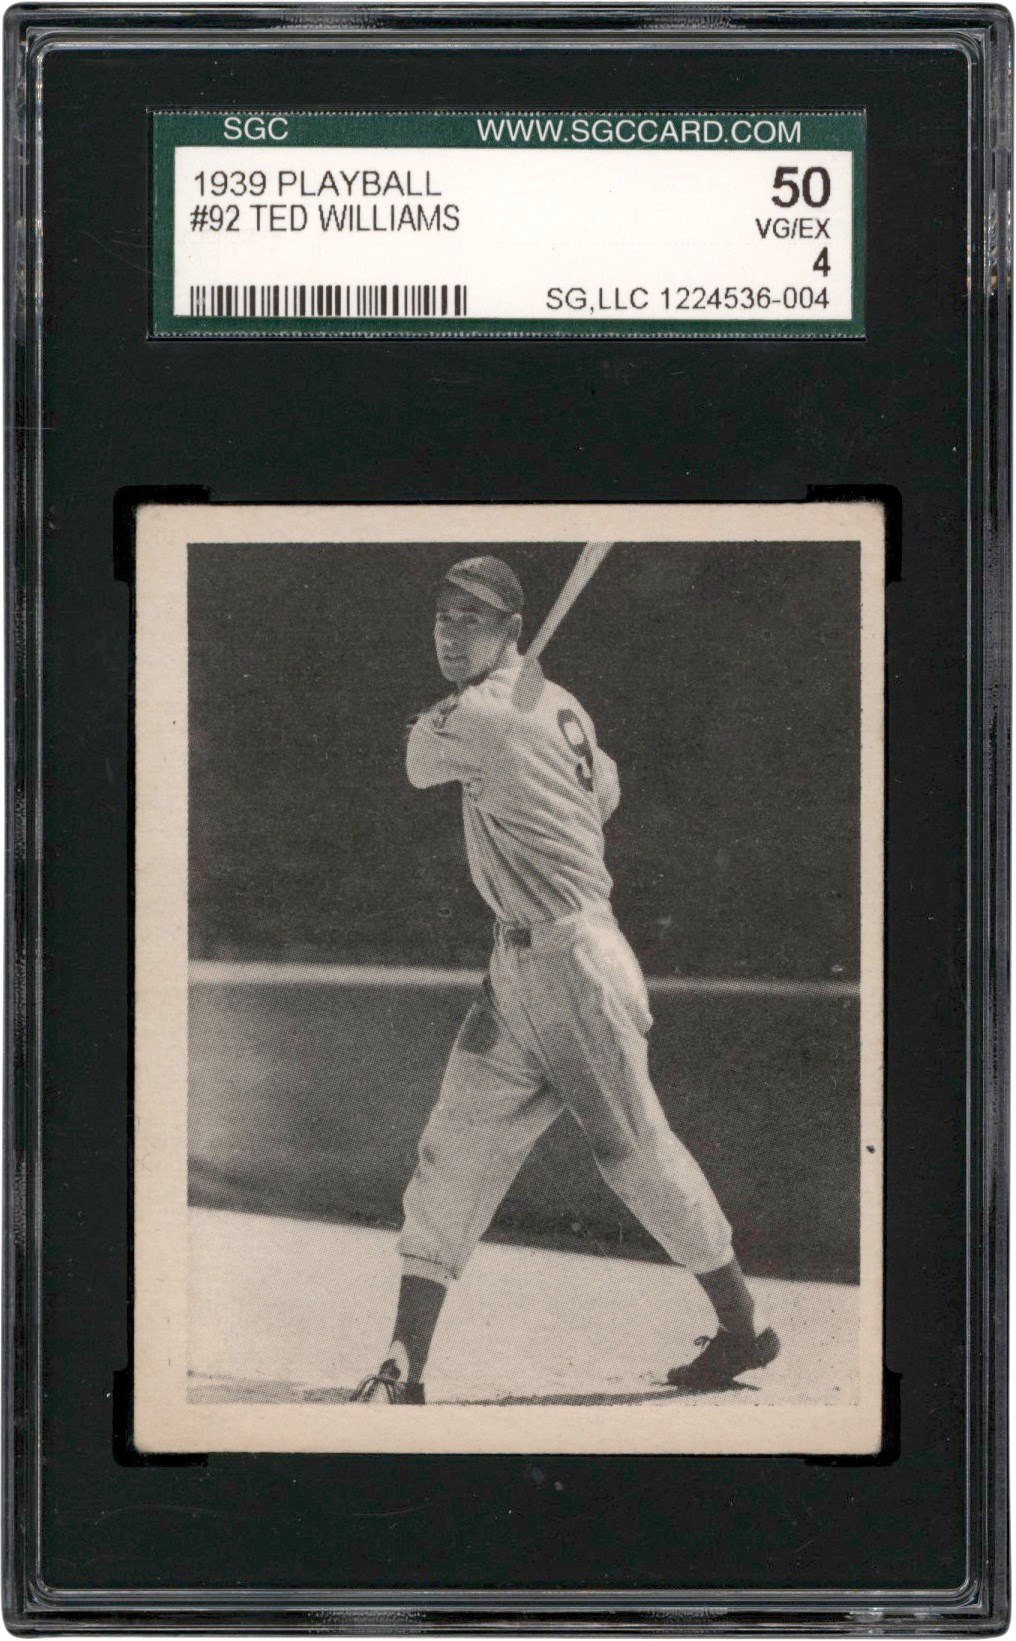 - 939 Play Ball #92 Ted Williams Rookie Card SGC VG-EX 4